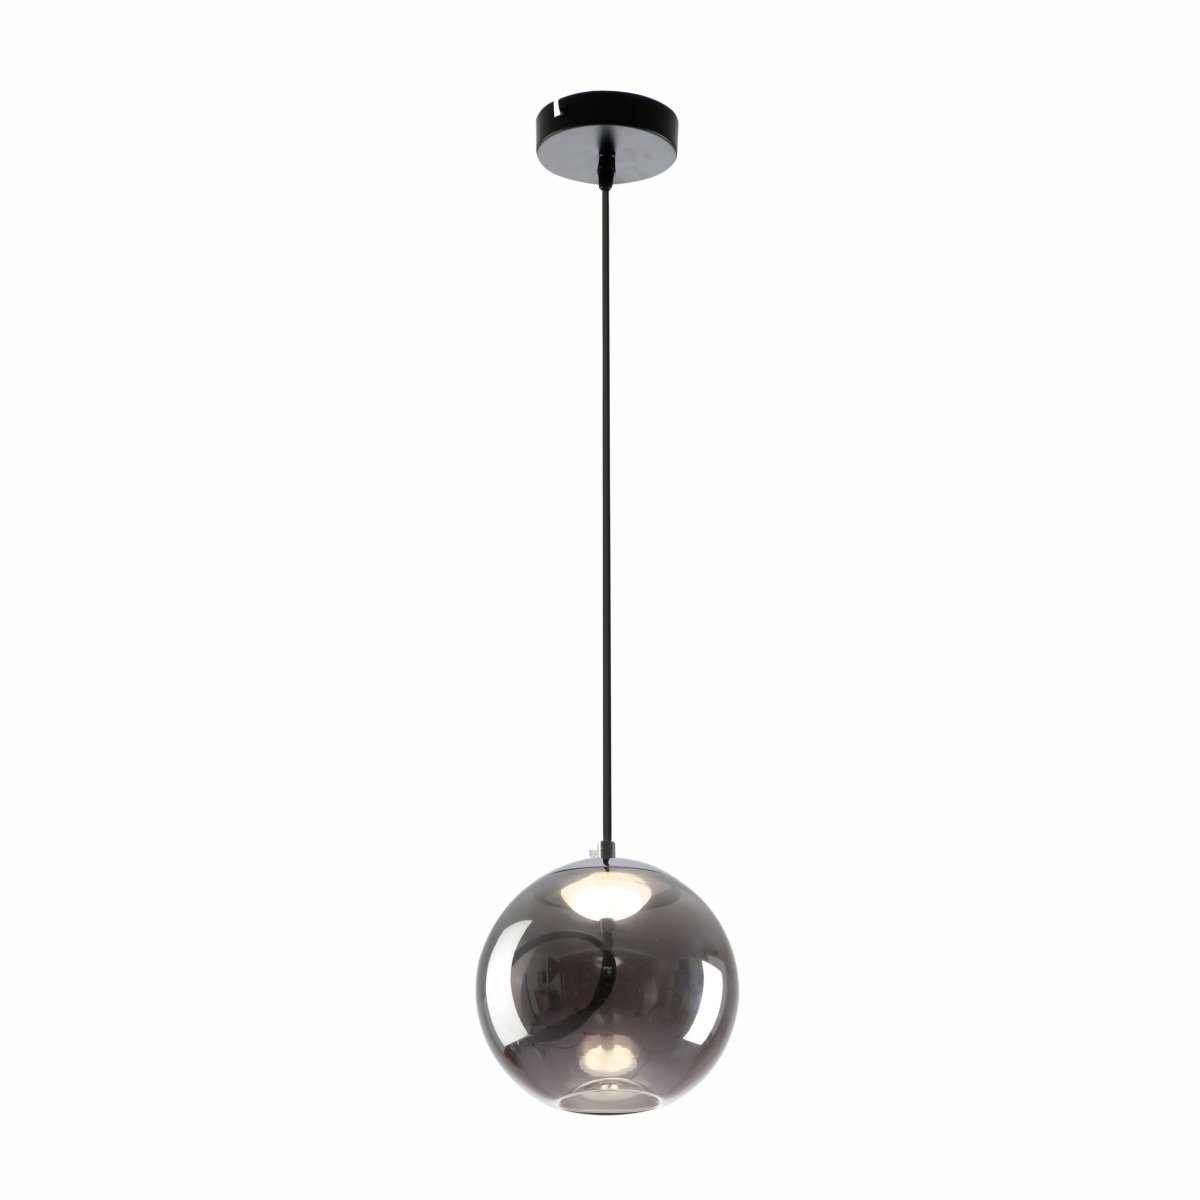 Main image of Smoky Glass Globe Pendant Light S with Built-in LED 4.5W | TEKLED 159-17336